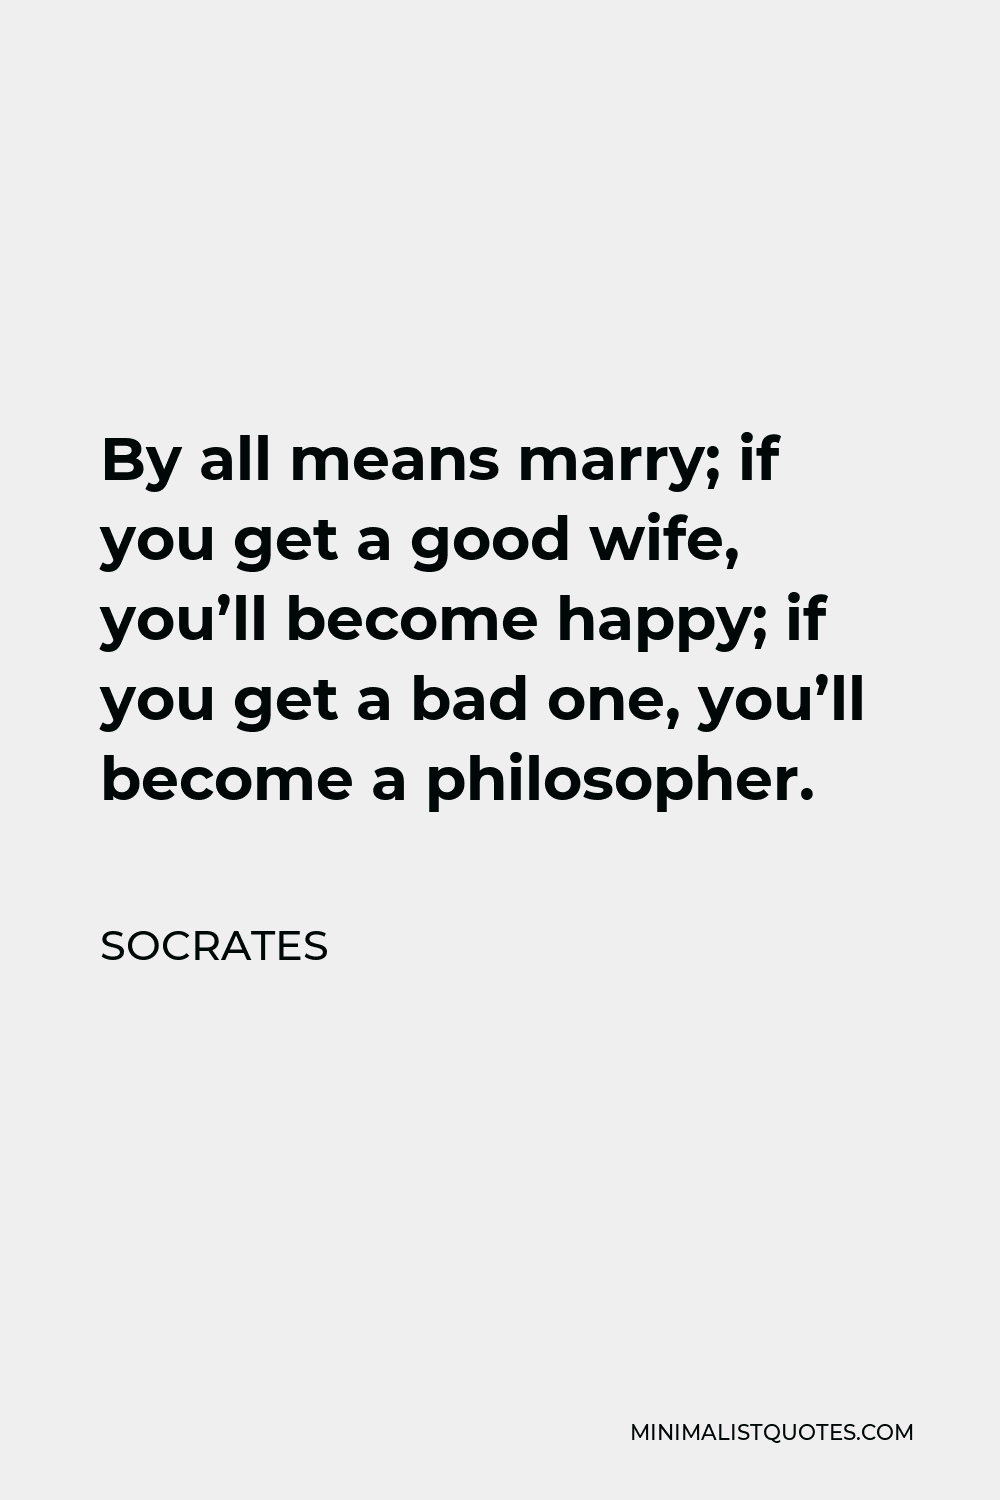 Socrates Quote - By all means marry; if you get a good wife, you’ll become happy; if you get a bad one, you’ll become a philosopher.